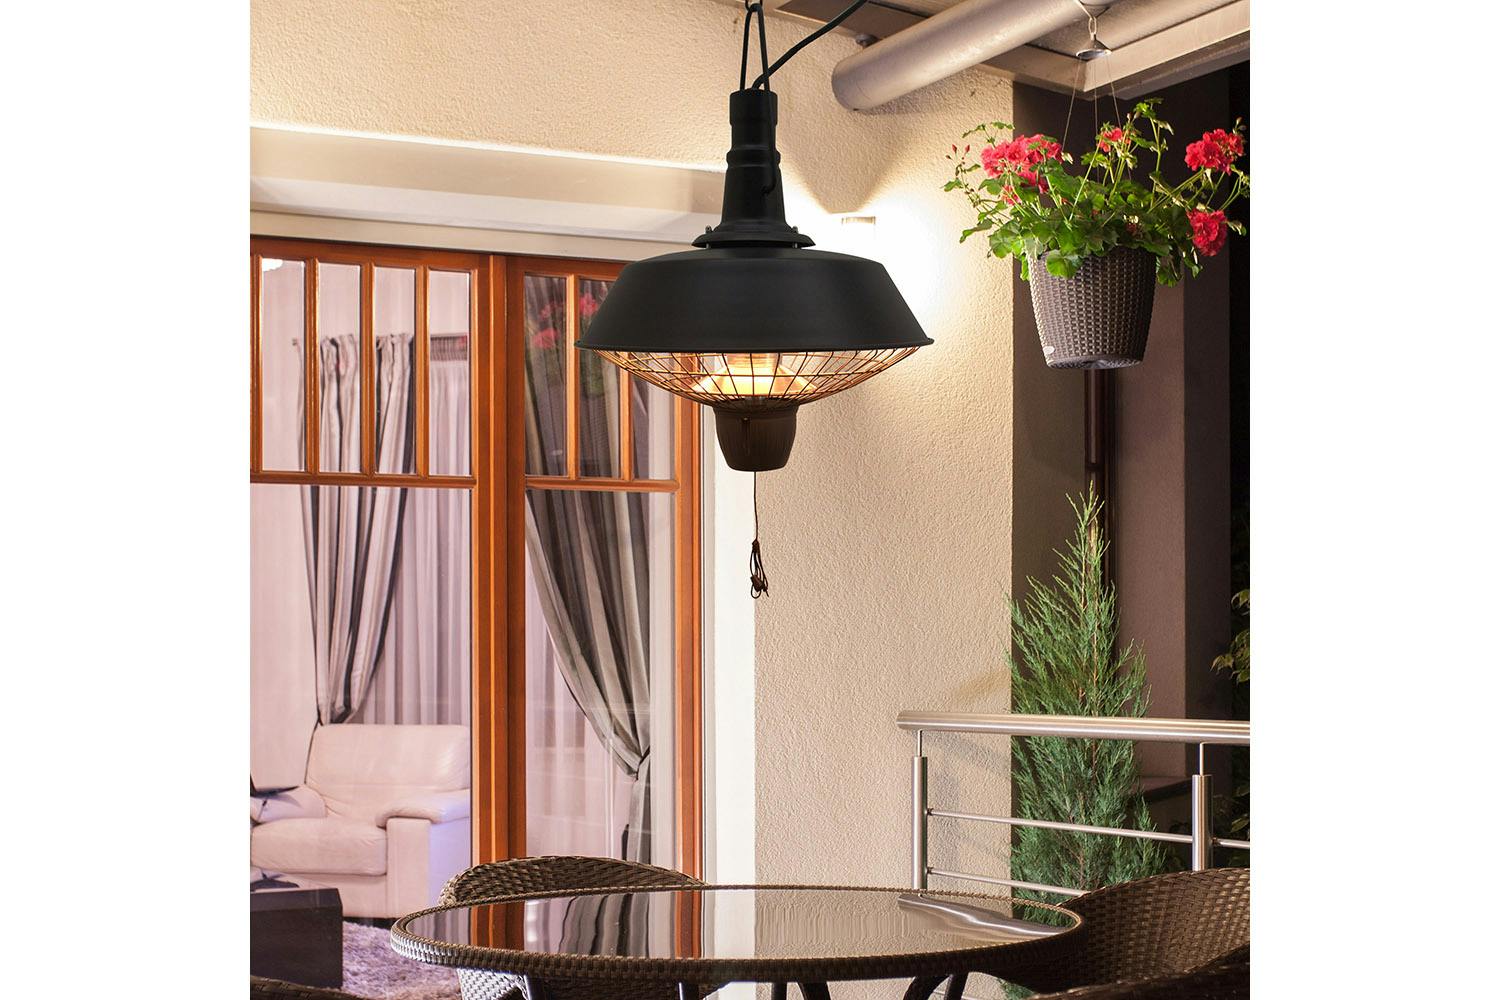 Outsunny Outdoor Electric Heater | Black